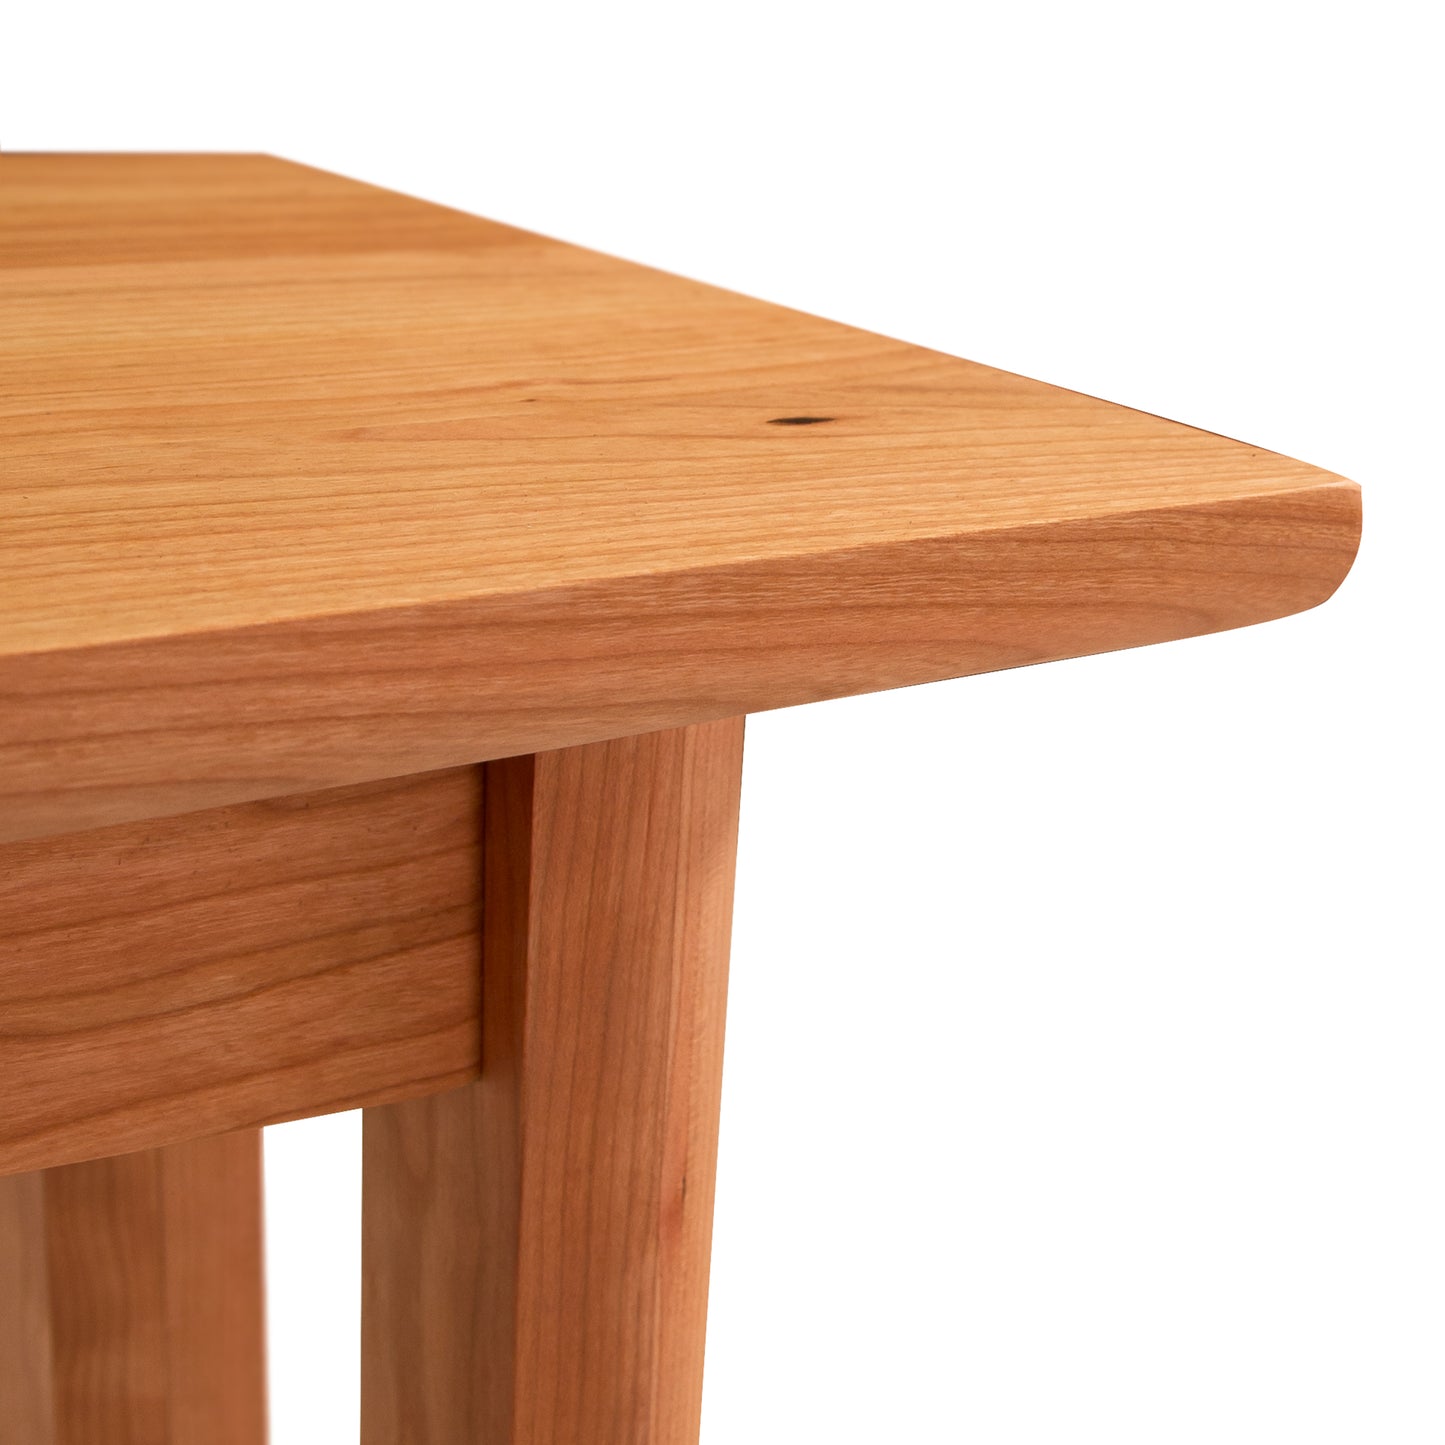 Corner of a Vermont Furniture Designs Heartwood Shaker Bench showing the seat and the top part of a leg, against a white background.